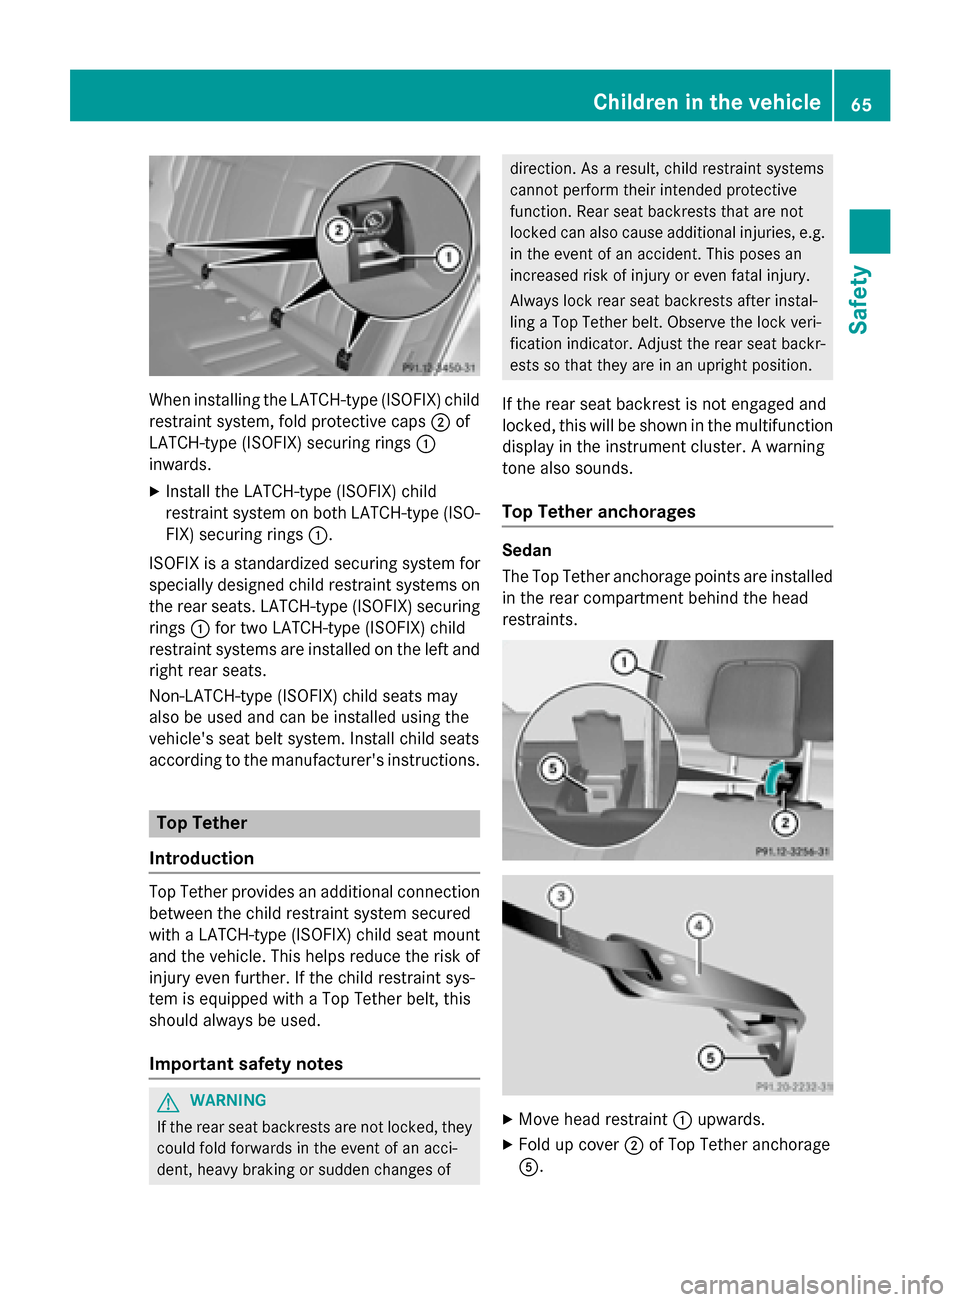 MERCEDES-BENZ E-Class SEDAN 2015 W212 User Guide When installing the LATCH-type (ISOFIX) child
restraint system, fold protective caps 0044of
LATCH-type (ISOFIX) securing rings 0043
inwards.
X Install the LATCH-type (ISOFIX) child
restraint system on